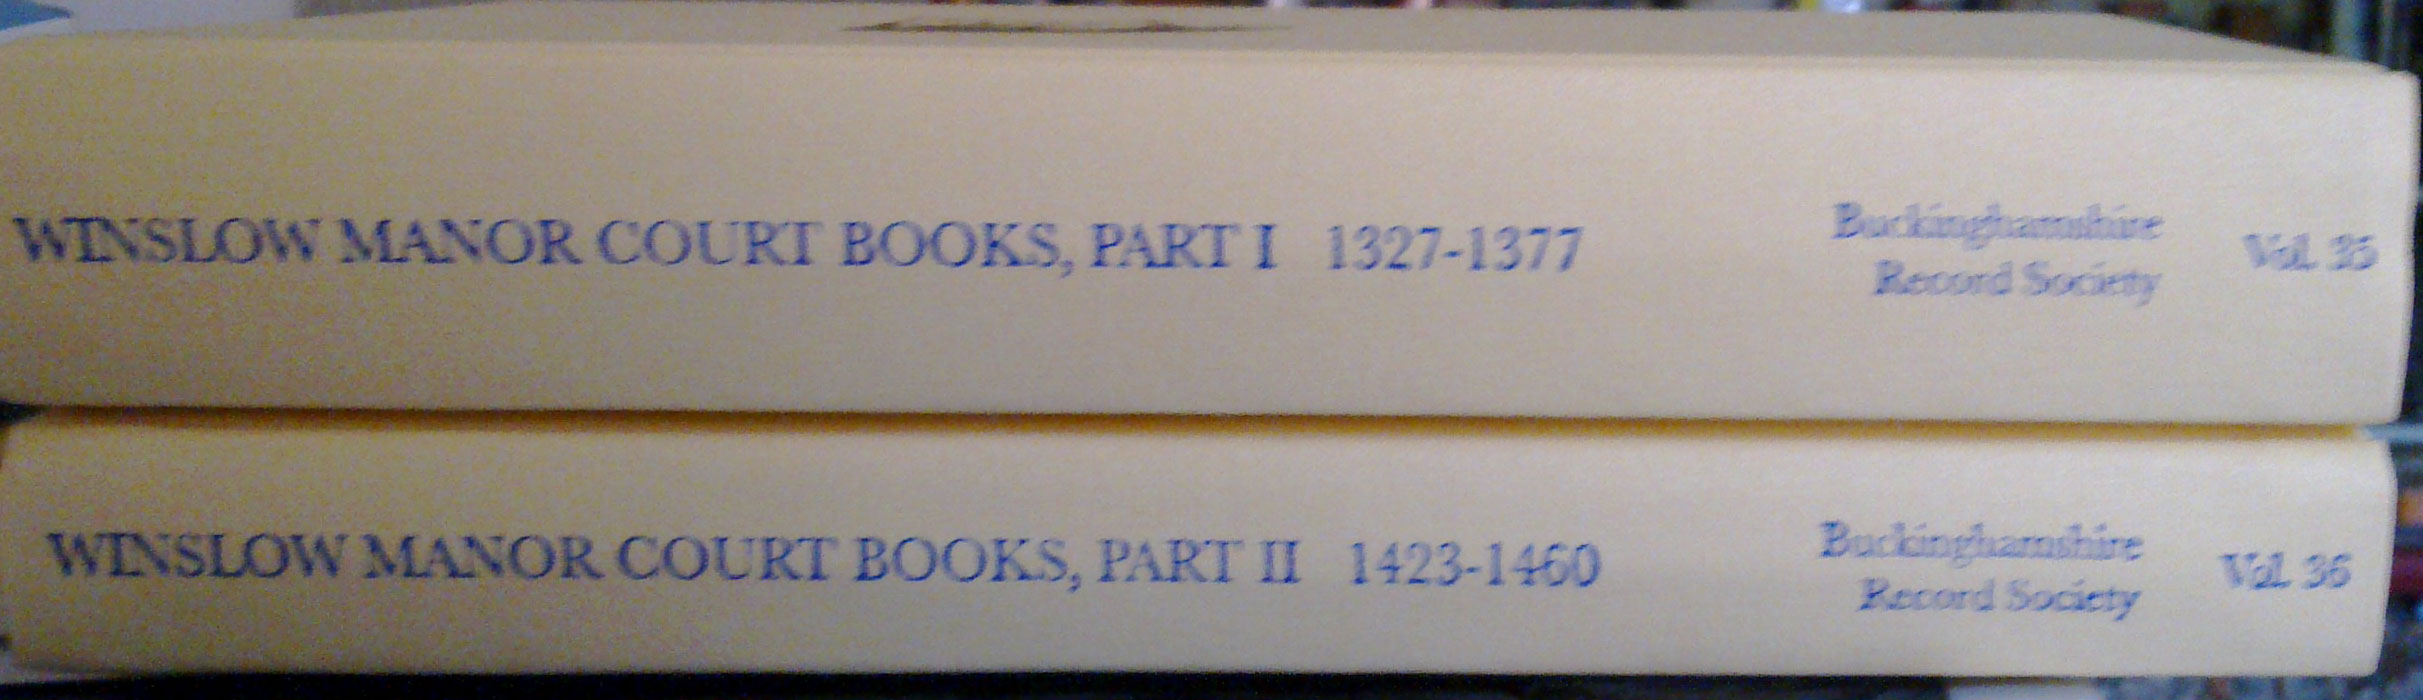 The two volumes